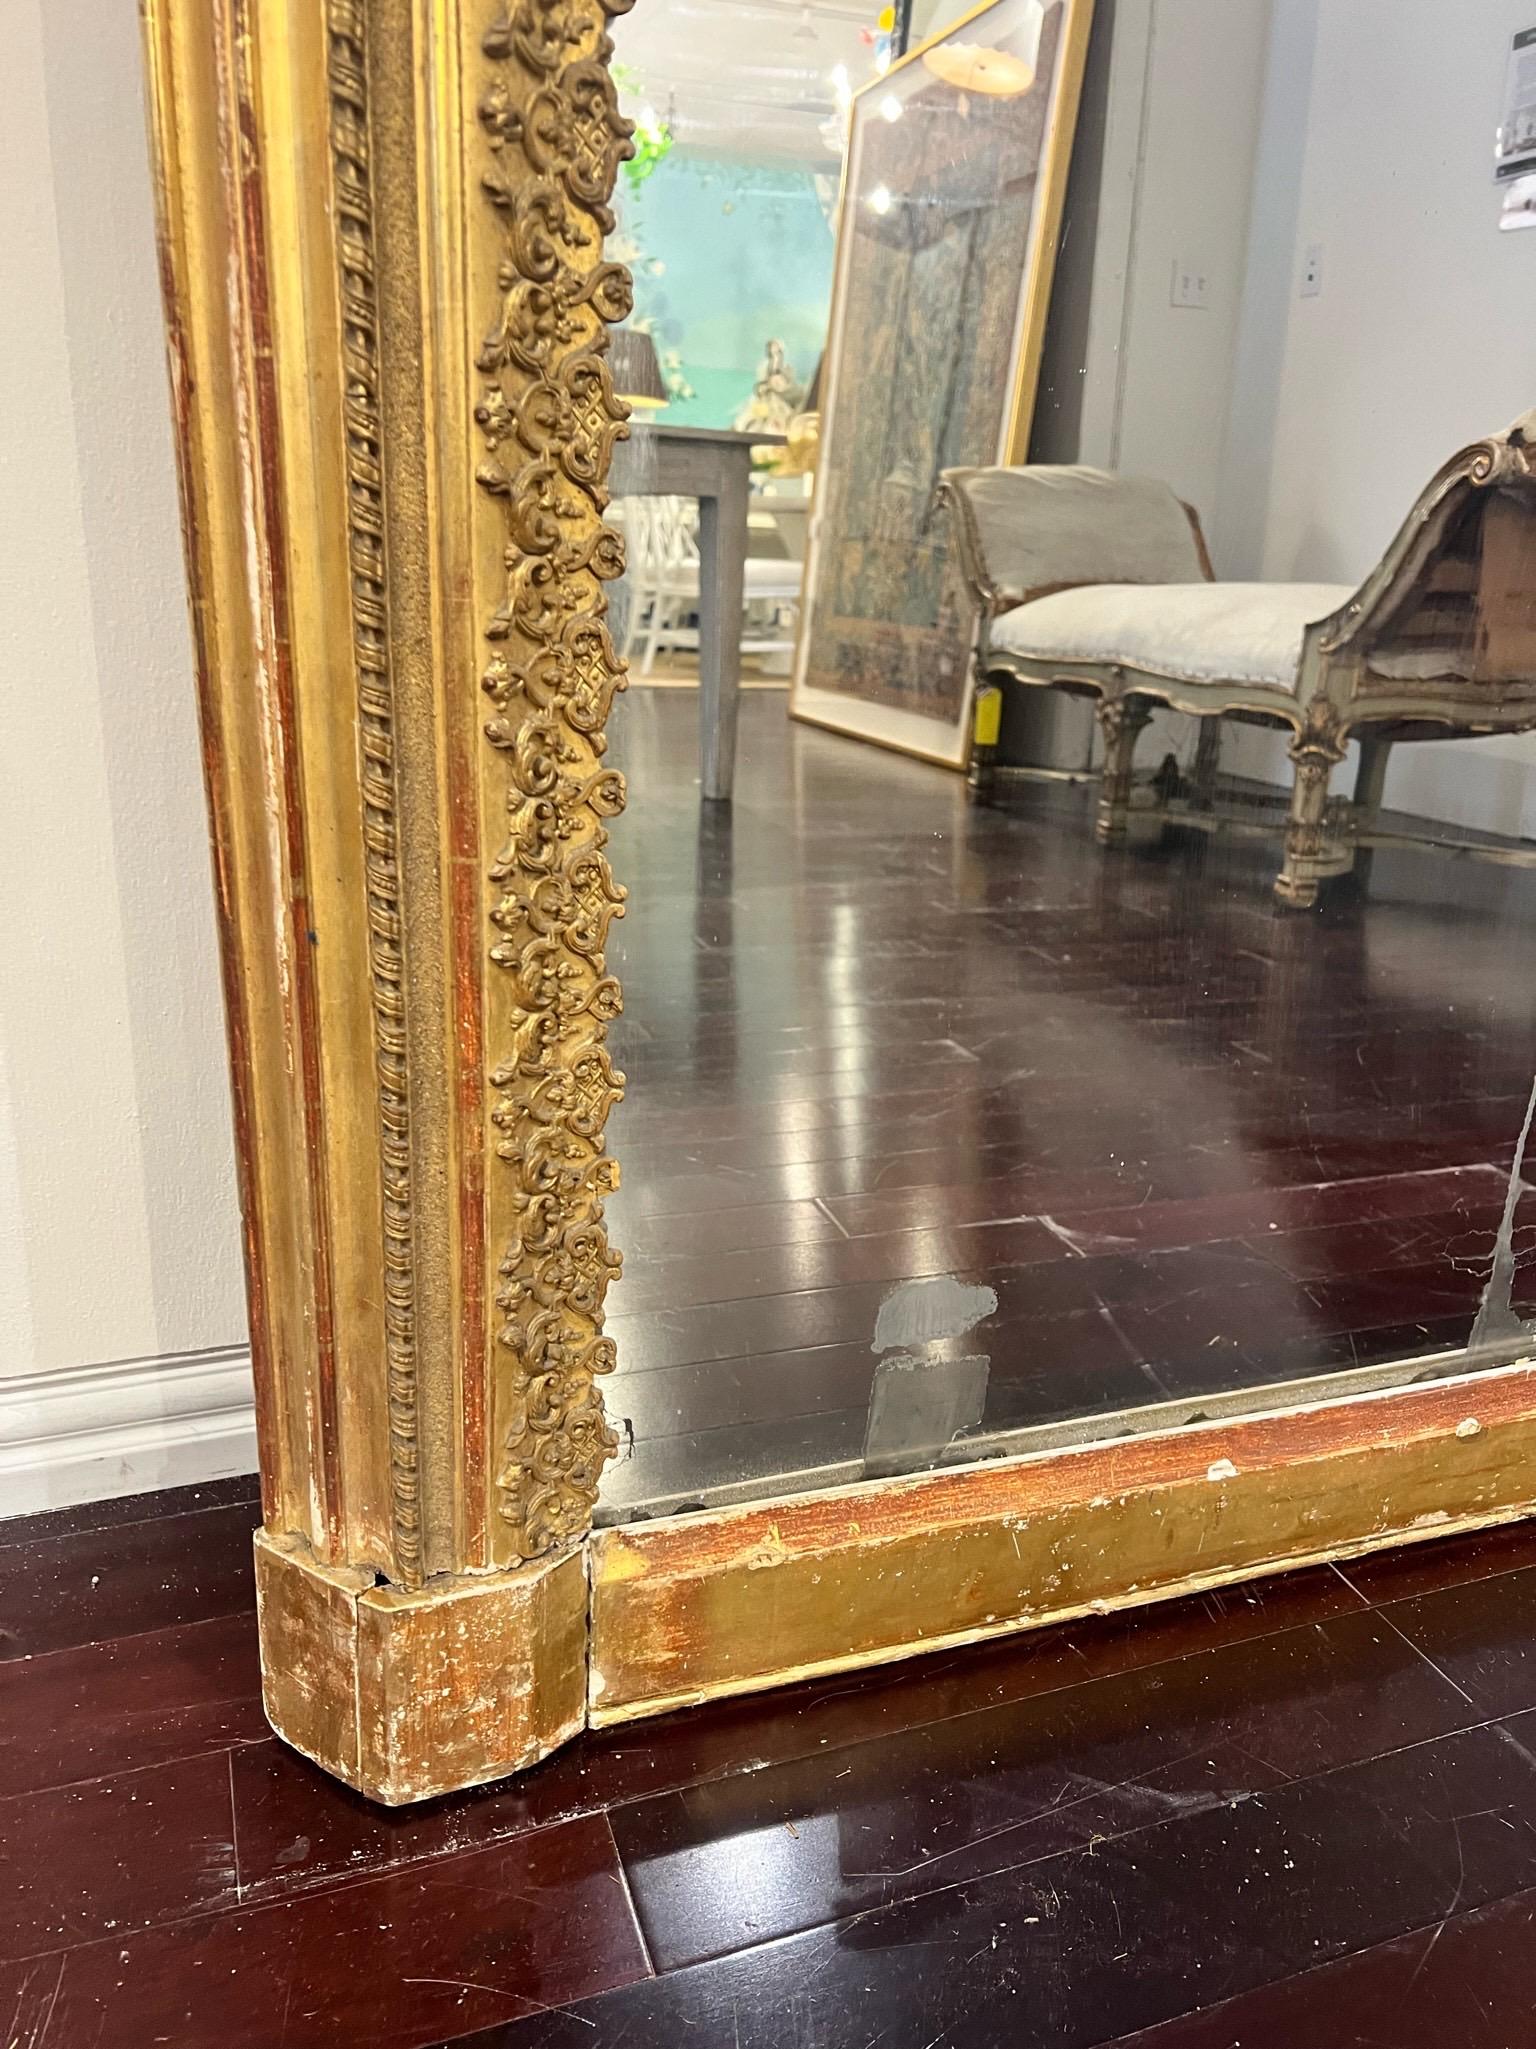 An exceptional large scale mirror sourced in the South of France, this piece measures over 7 feet in height featuring the original diamond dust mirror. Exquisitely carved, gold gilt and backed in wood, this French mirror can be hung but is large